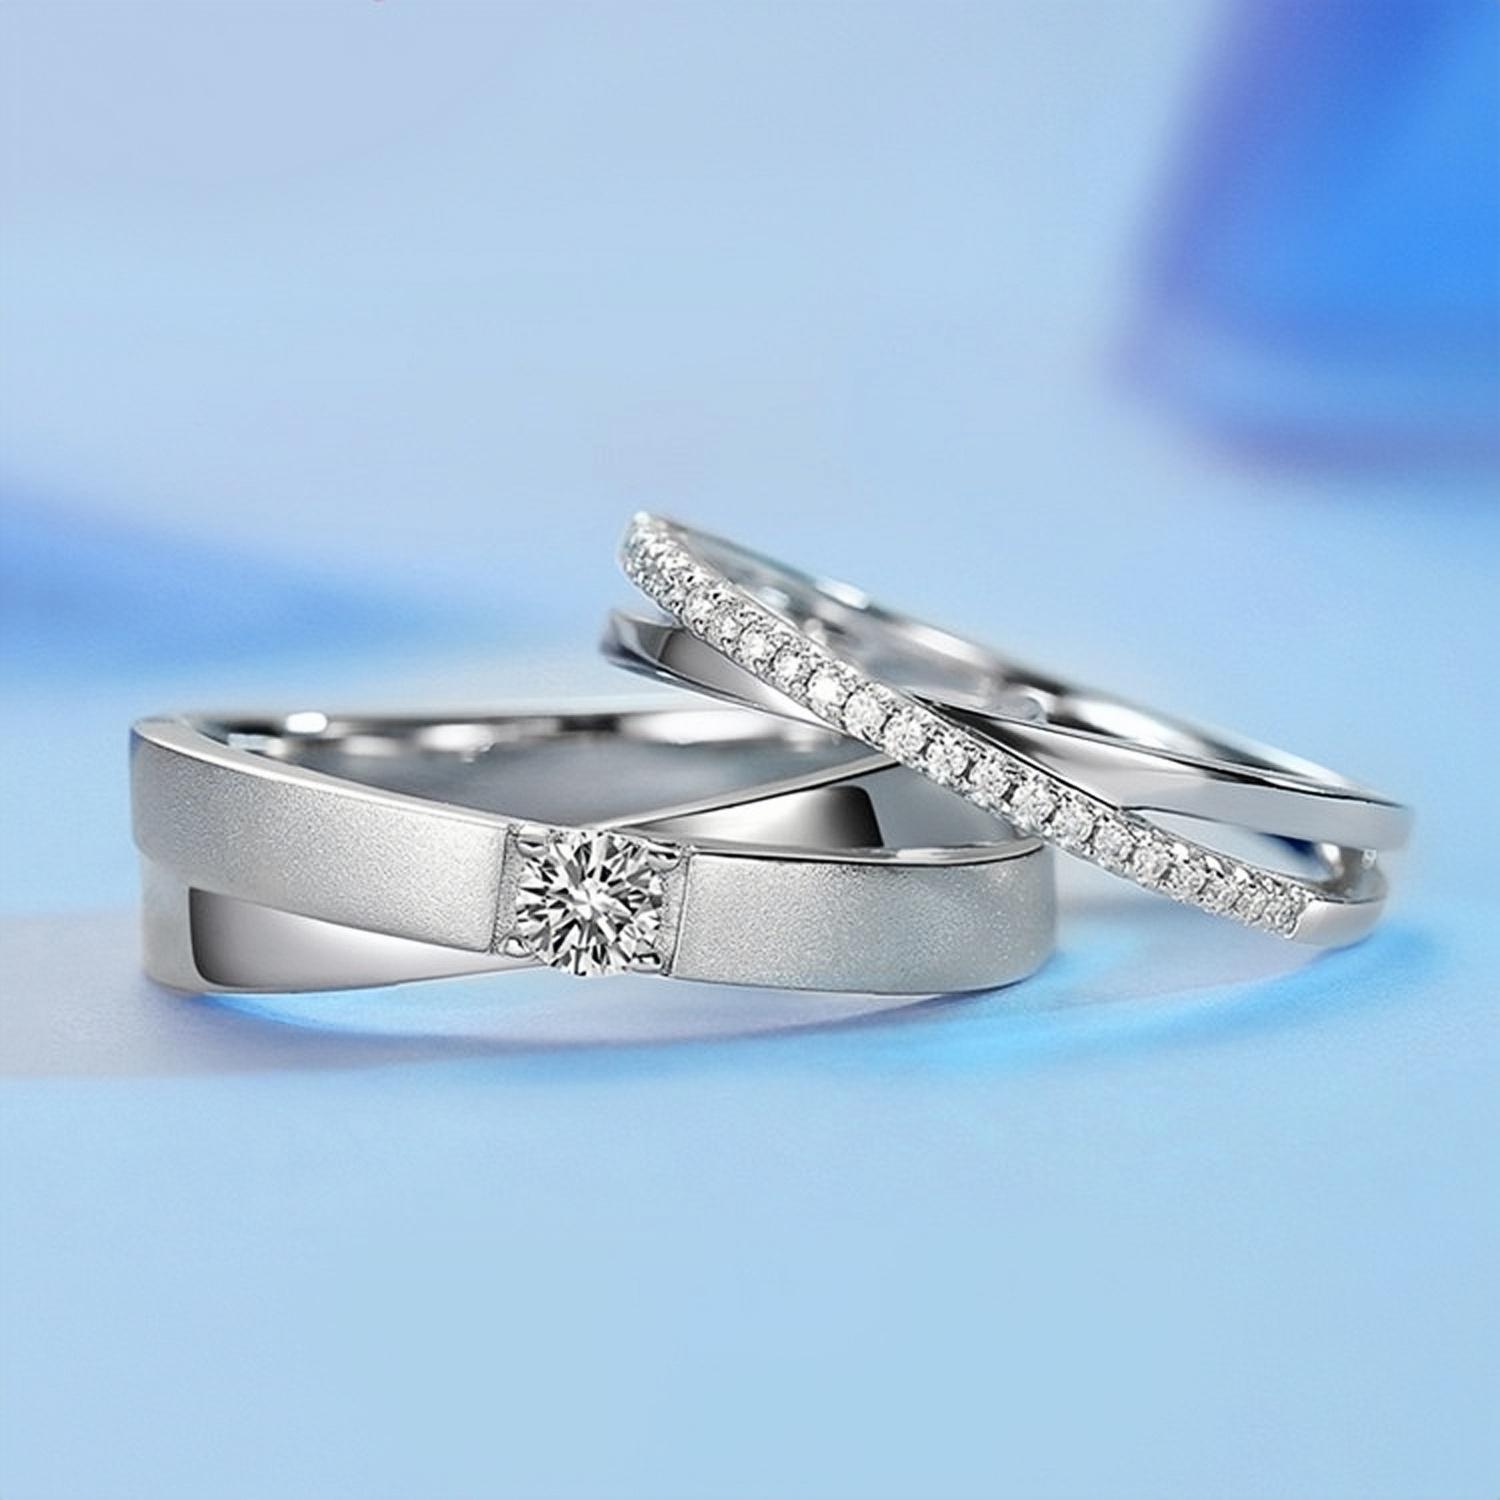 Unique Infinity Love Matching Promise Rings Sets In Sterling Silver - CoupleSets